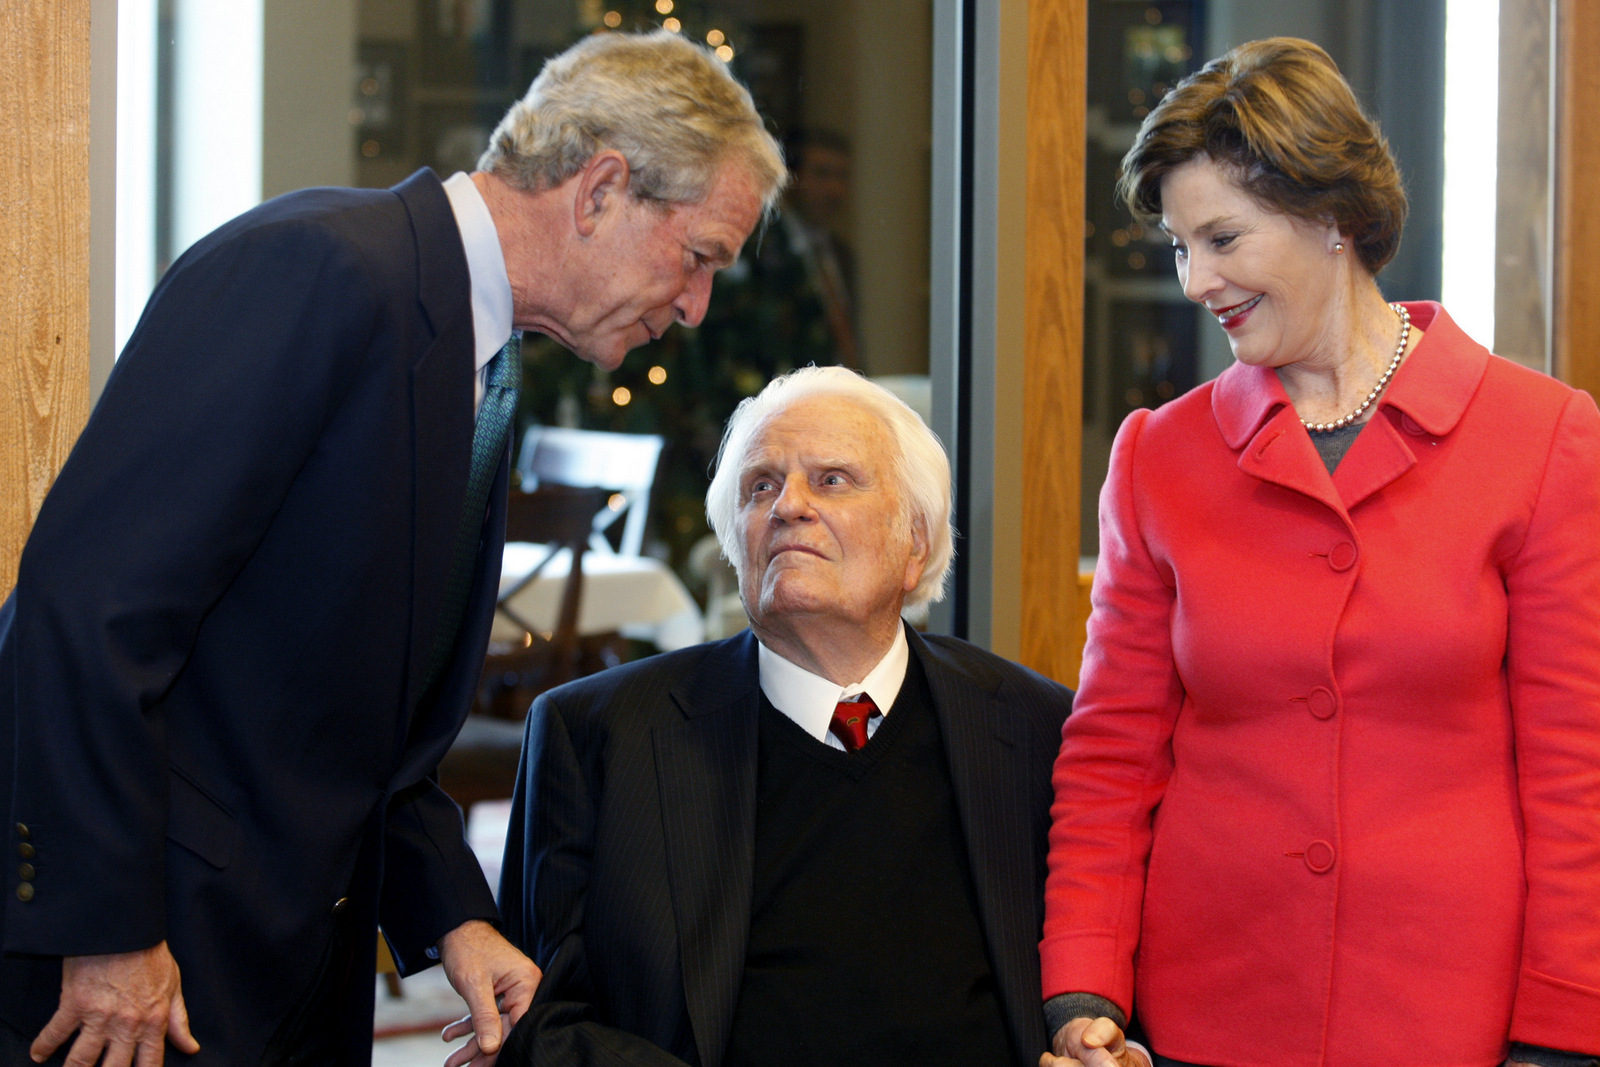 Former President George W. Bush, left, greets evangelist Billy Graham as Laura Bush looks on as they met for a brunch prior to a book signing at the Billy Graham Library in Charlotte, N.C., on Dec. 20, 2010. (AP/Nell Redmond)